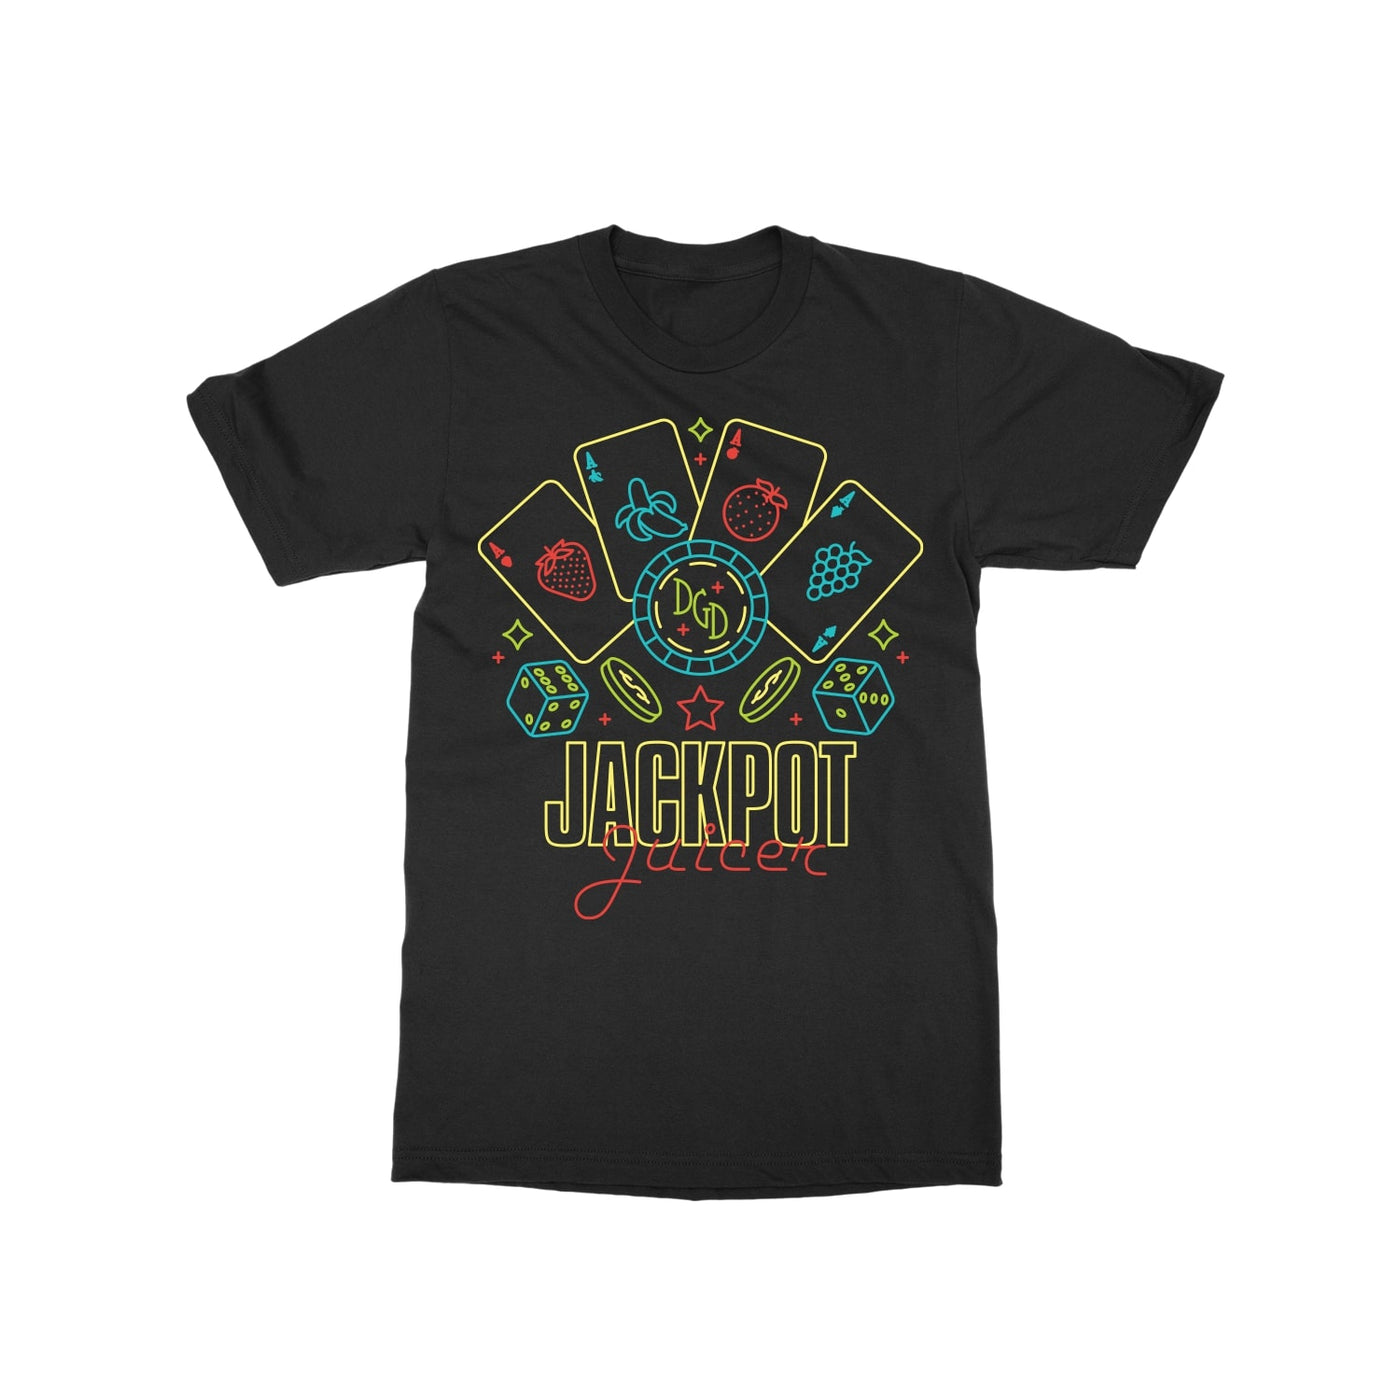 Image of Dance Gavin Dance Jackpot black tee shirt laying flat on a white background. Front of tee has images of 4 playing cards, 2 dice, and coins all in a neon light style design. Reads Jackpot Juicer under design in yellow and red text. 